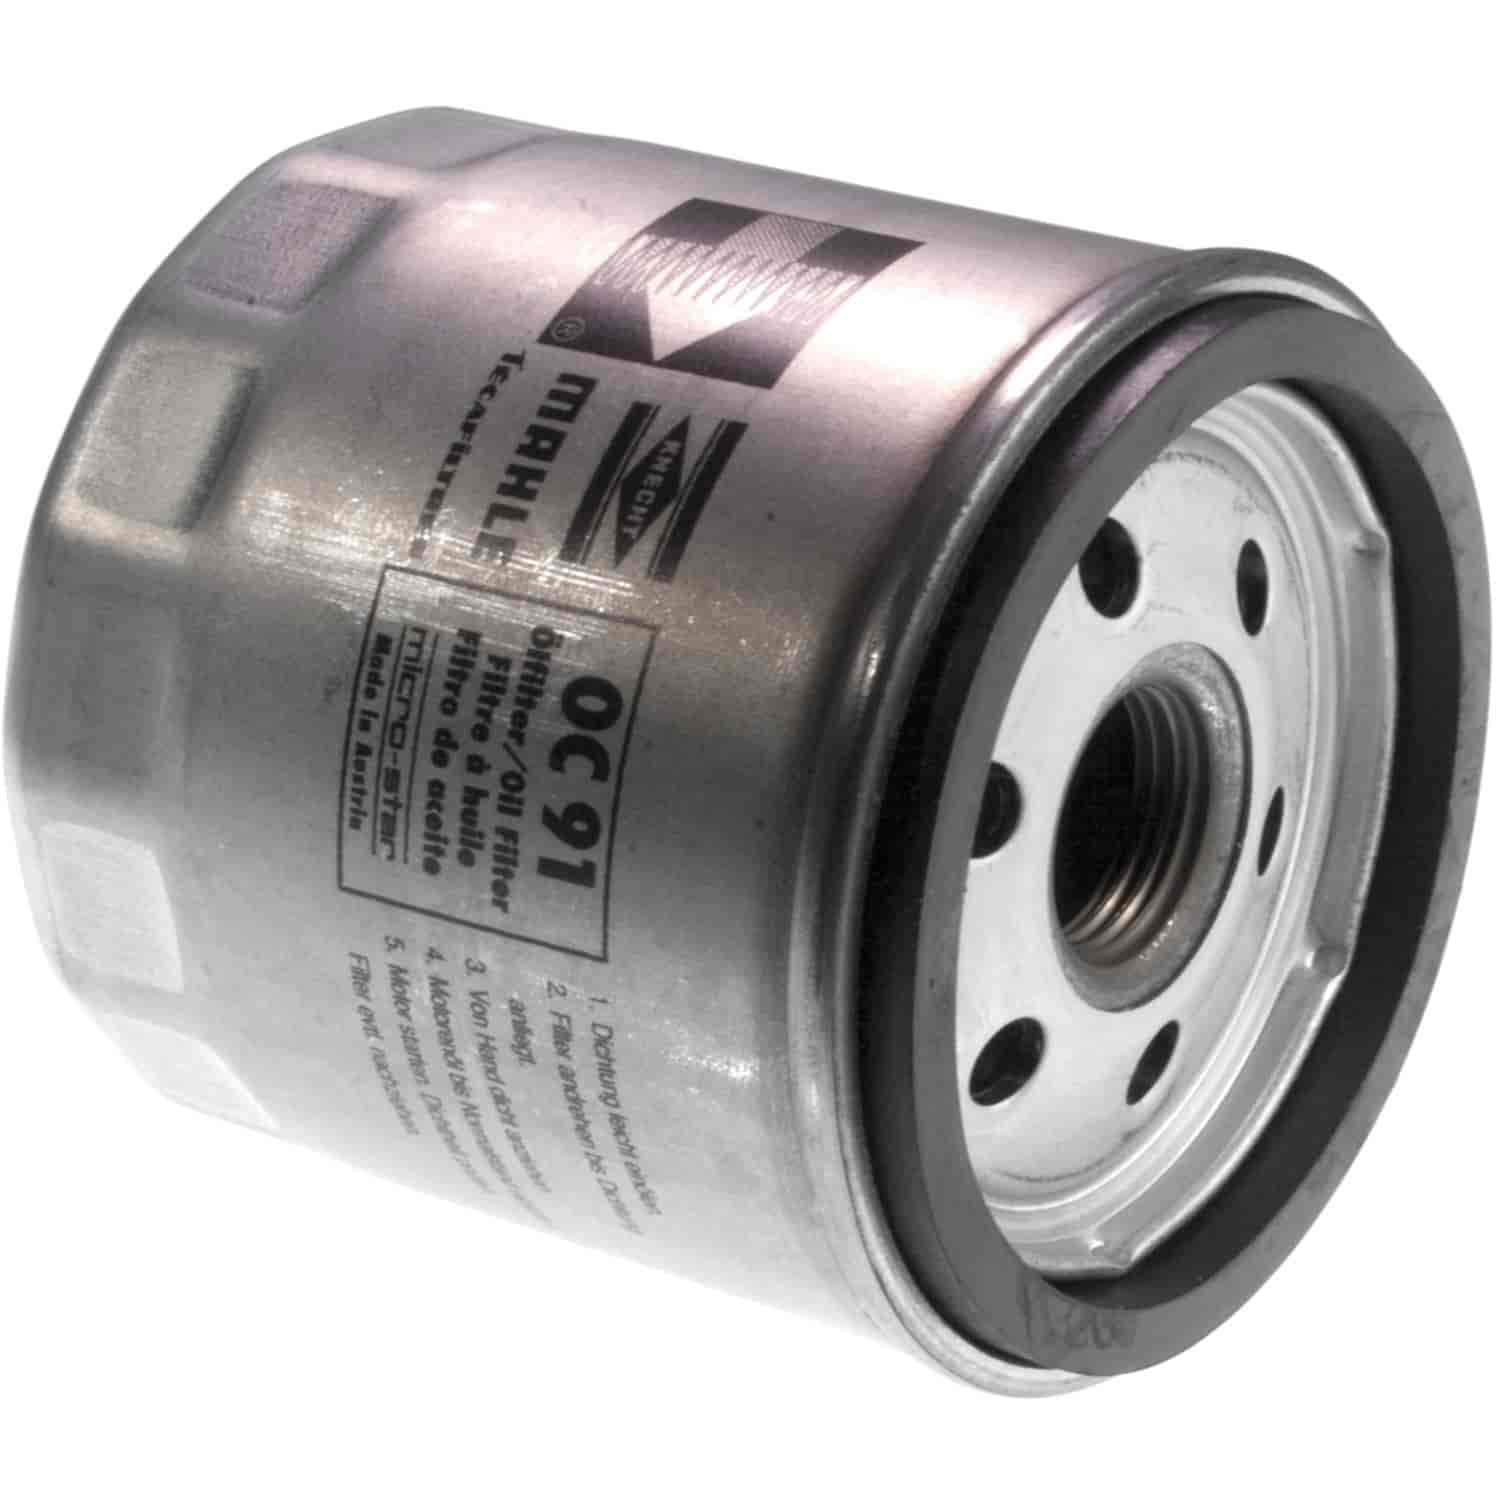 Mahle Oil Filter BMW M-Cycle R-Series 1994-2001